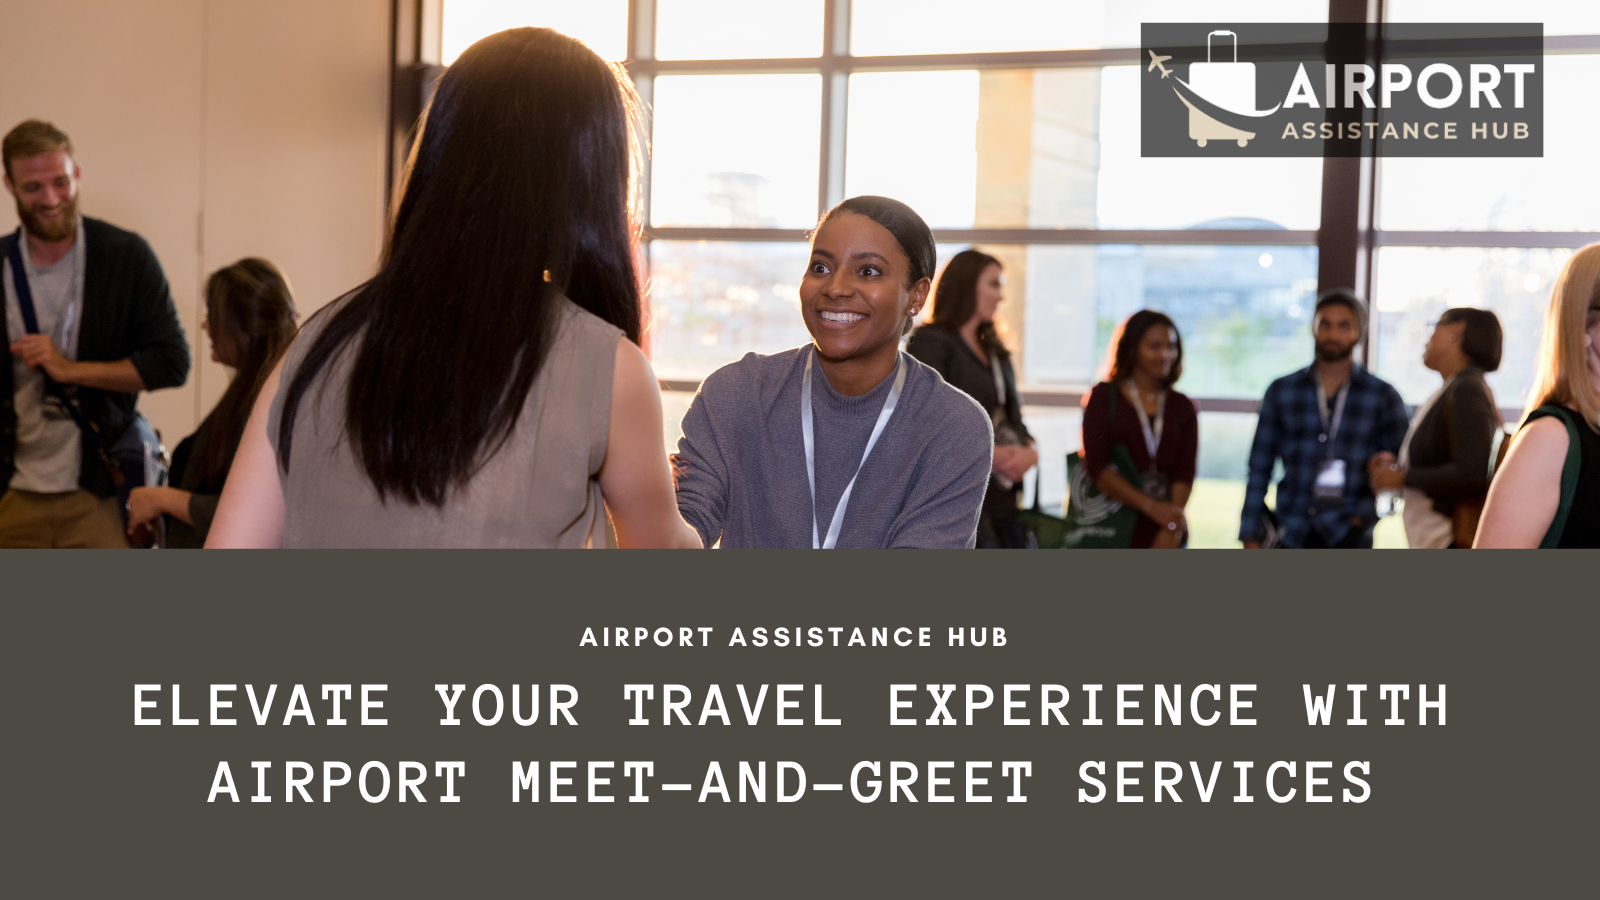 Elevate Your Travel Experience with Airport meet-and-greet services